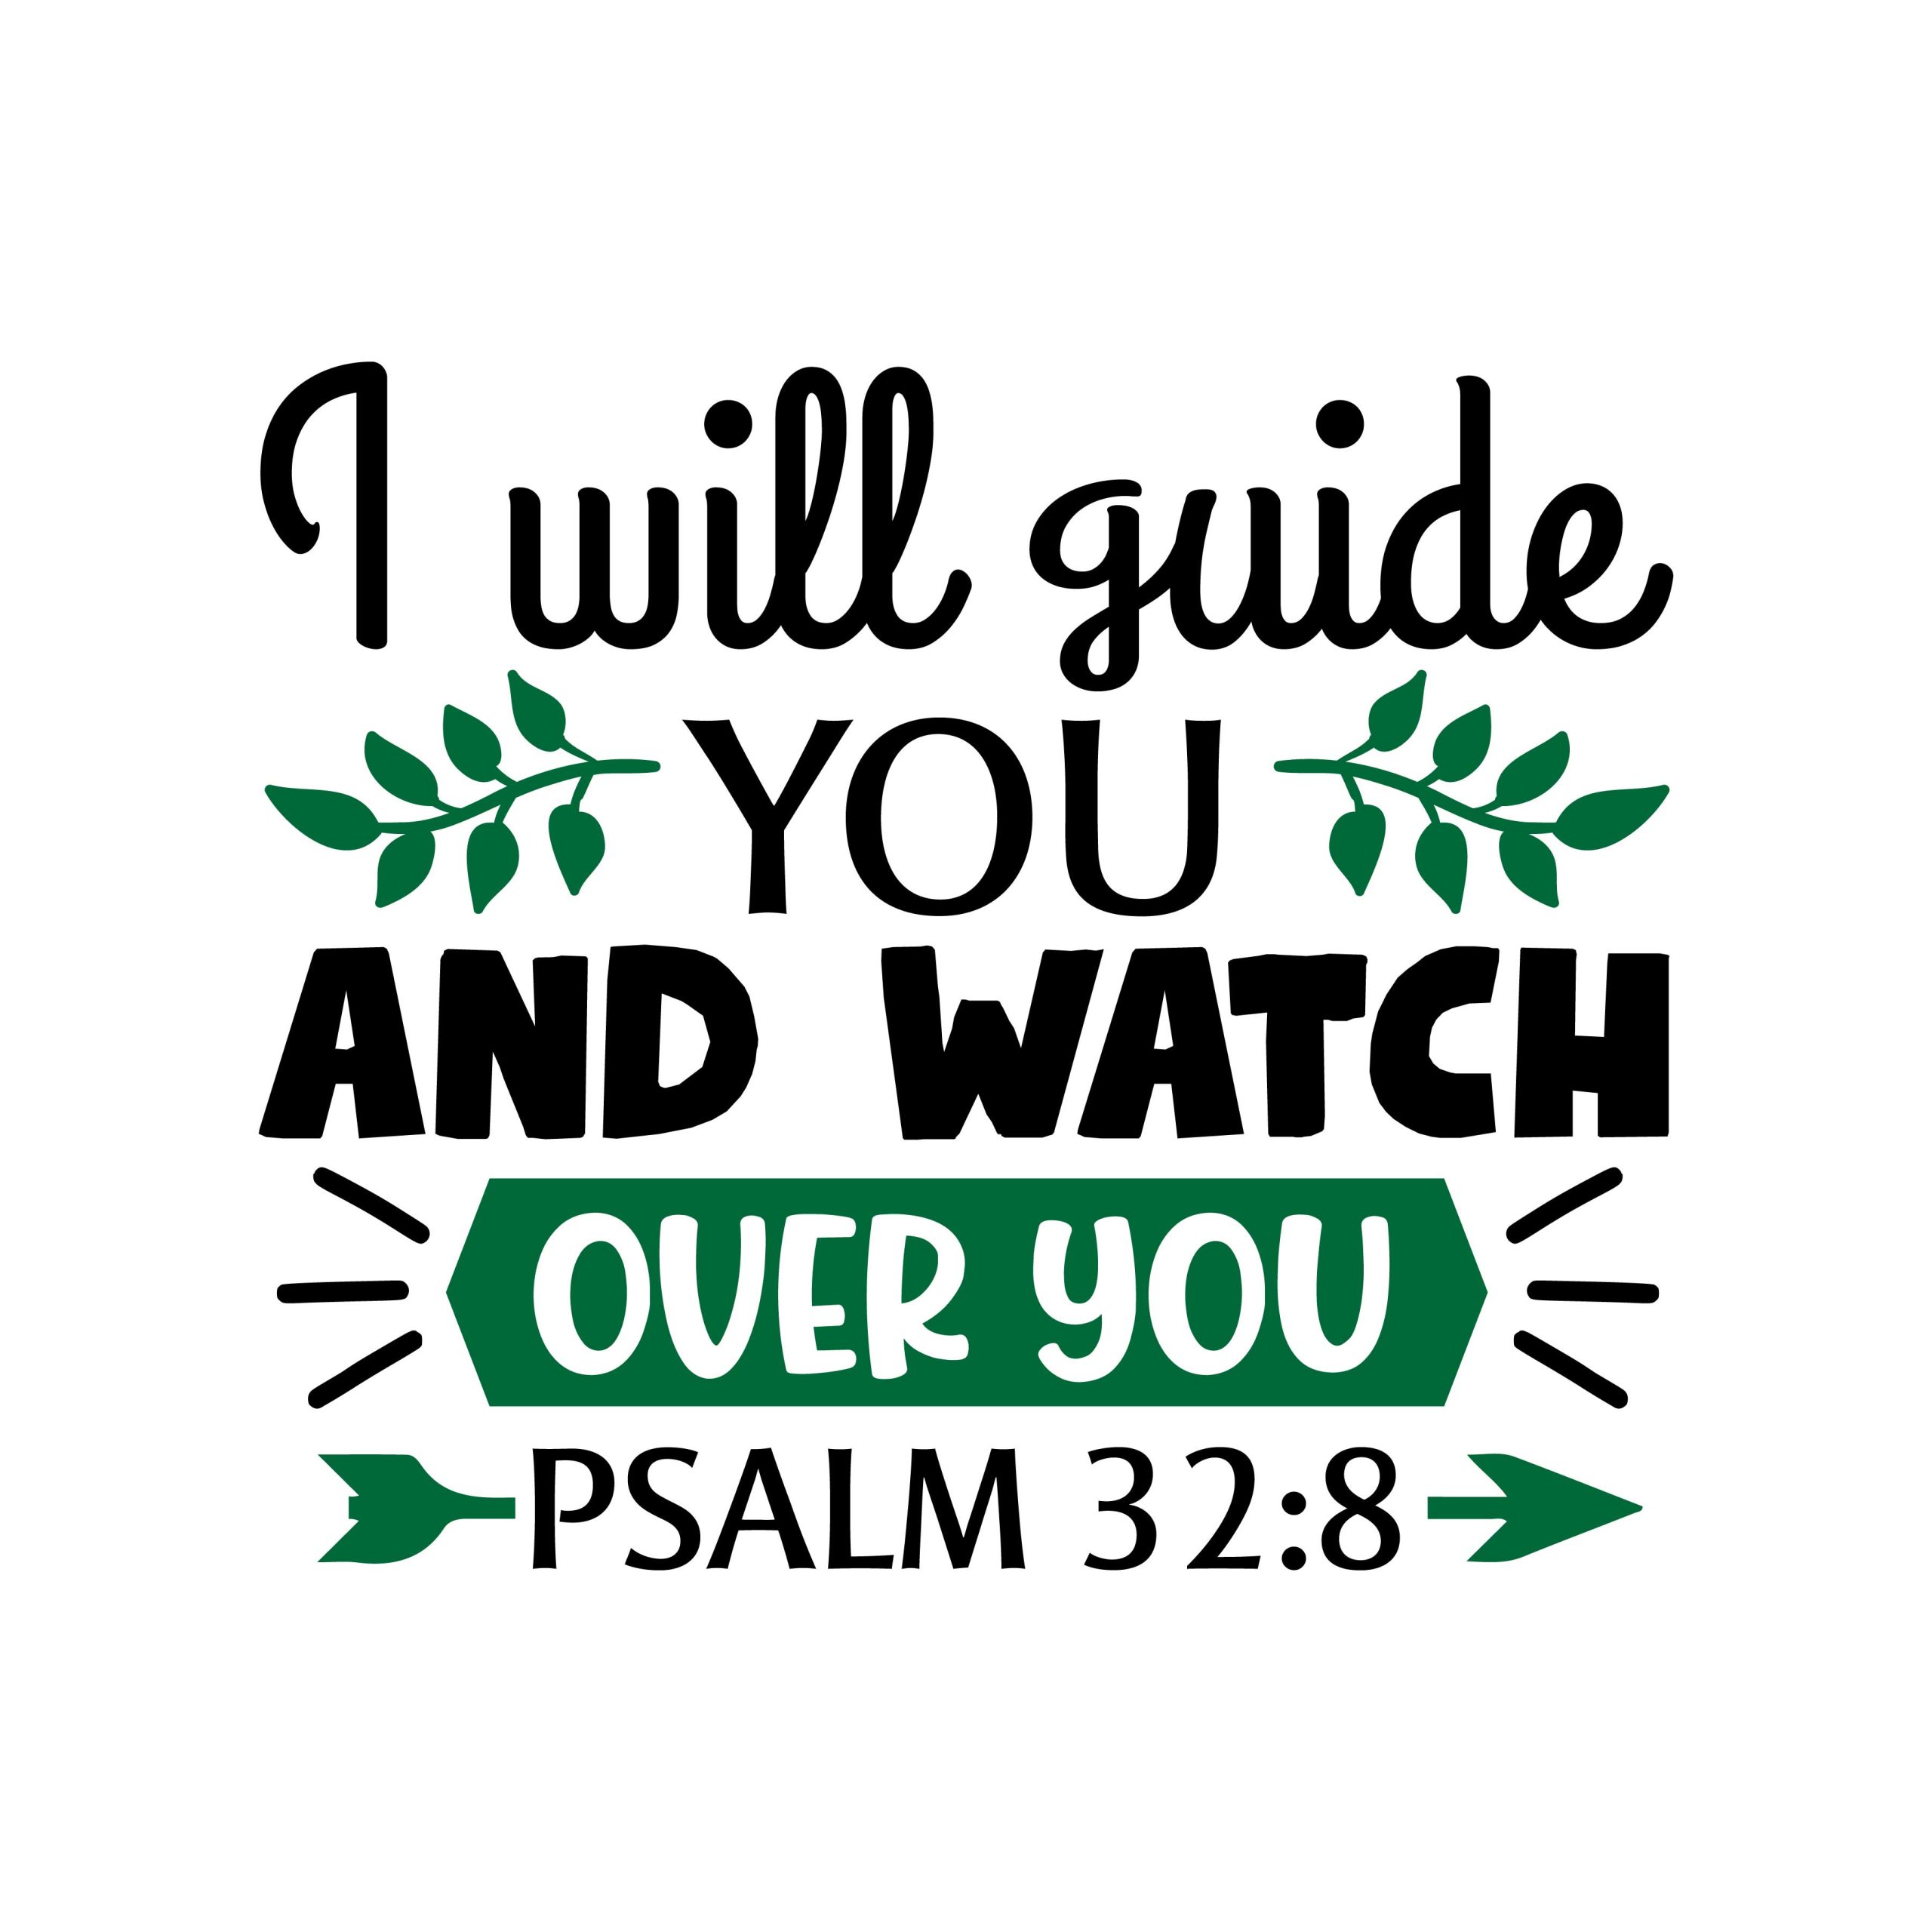 I will guide you and watch over you Psalm 32:8, bible verses, scripture verses, svg files, passages, sayings, cricut designs, silhouette, embroidery, bundle, free cut files, design space, vector